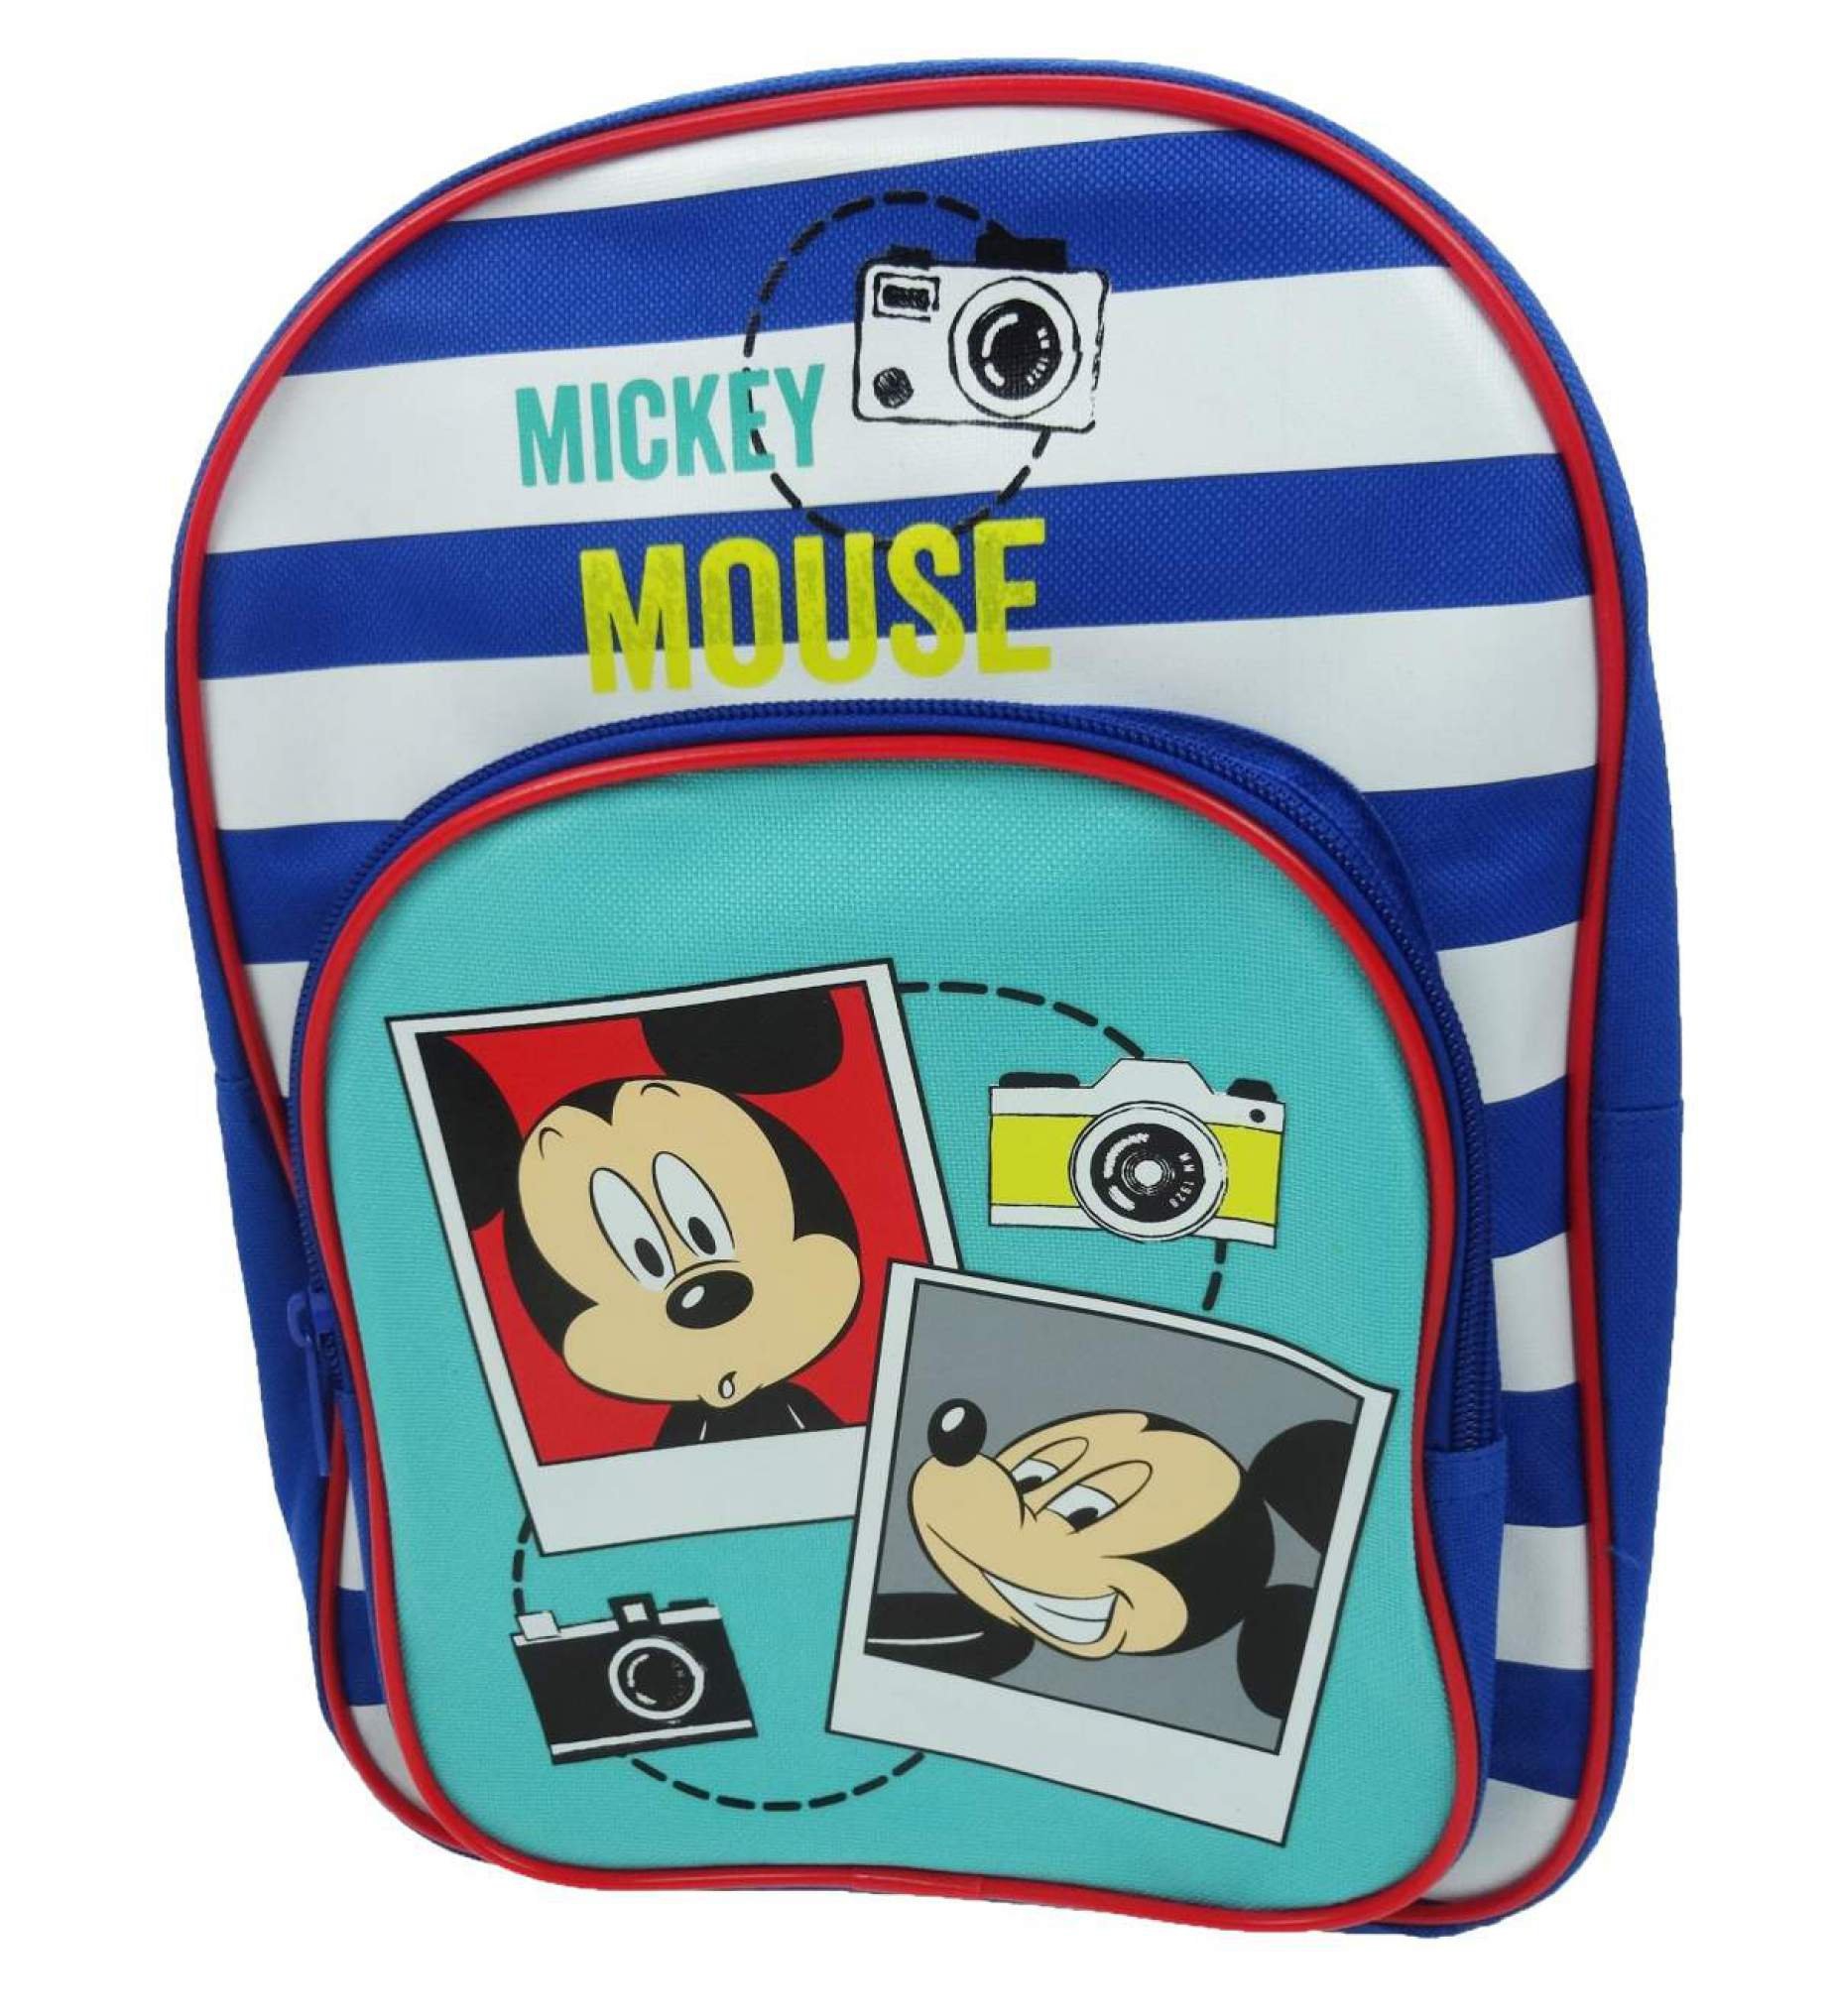 Disney Mickey Mouse Arch School Bag Rucksack Backpack